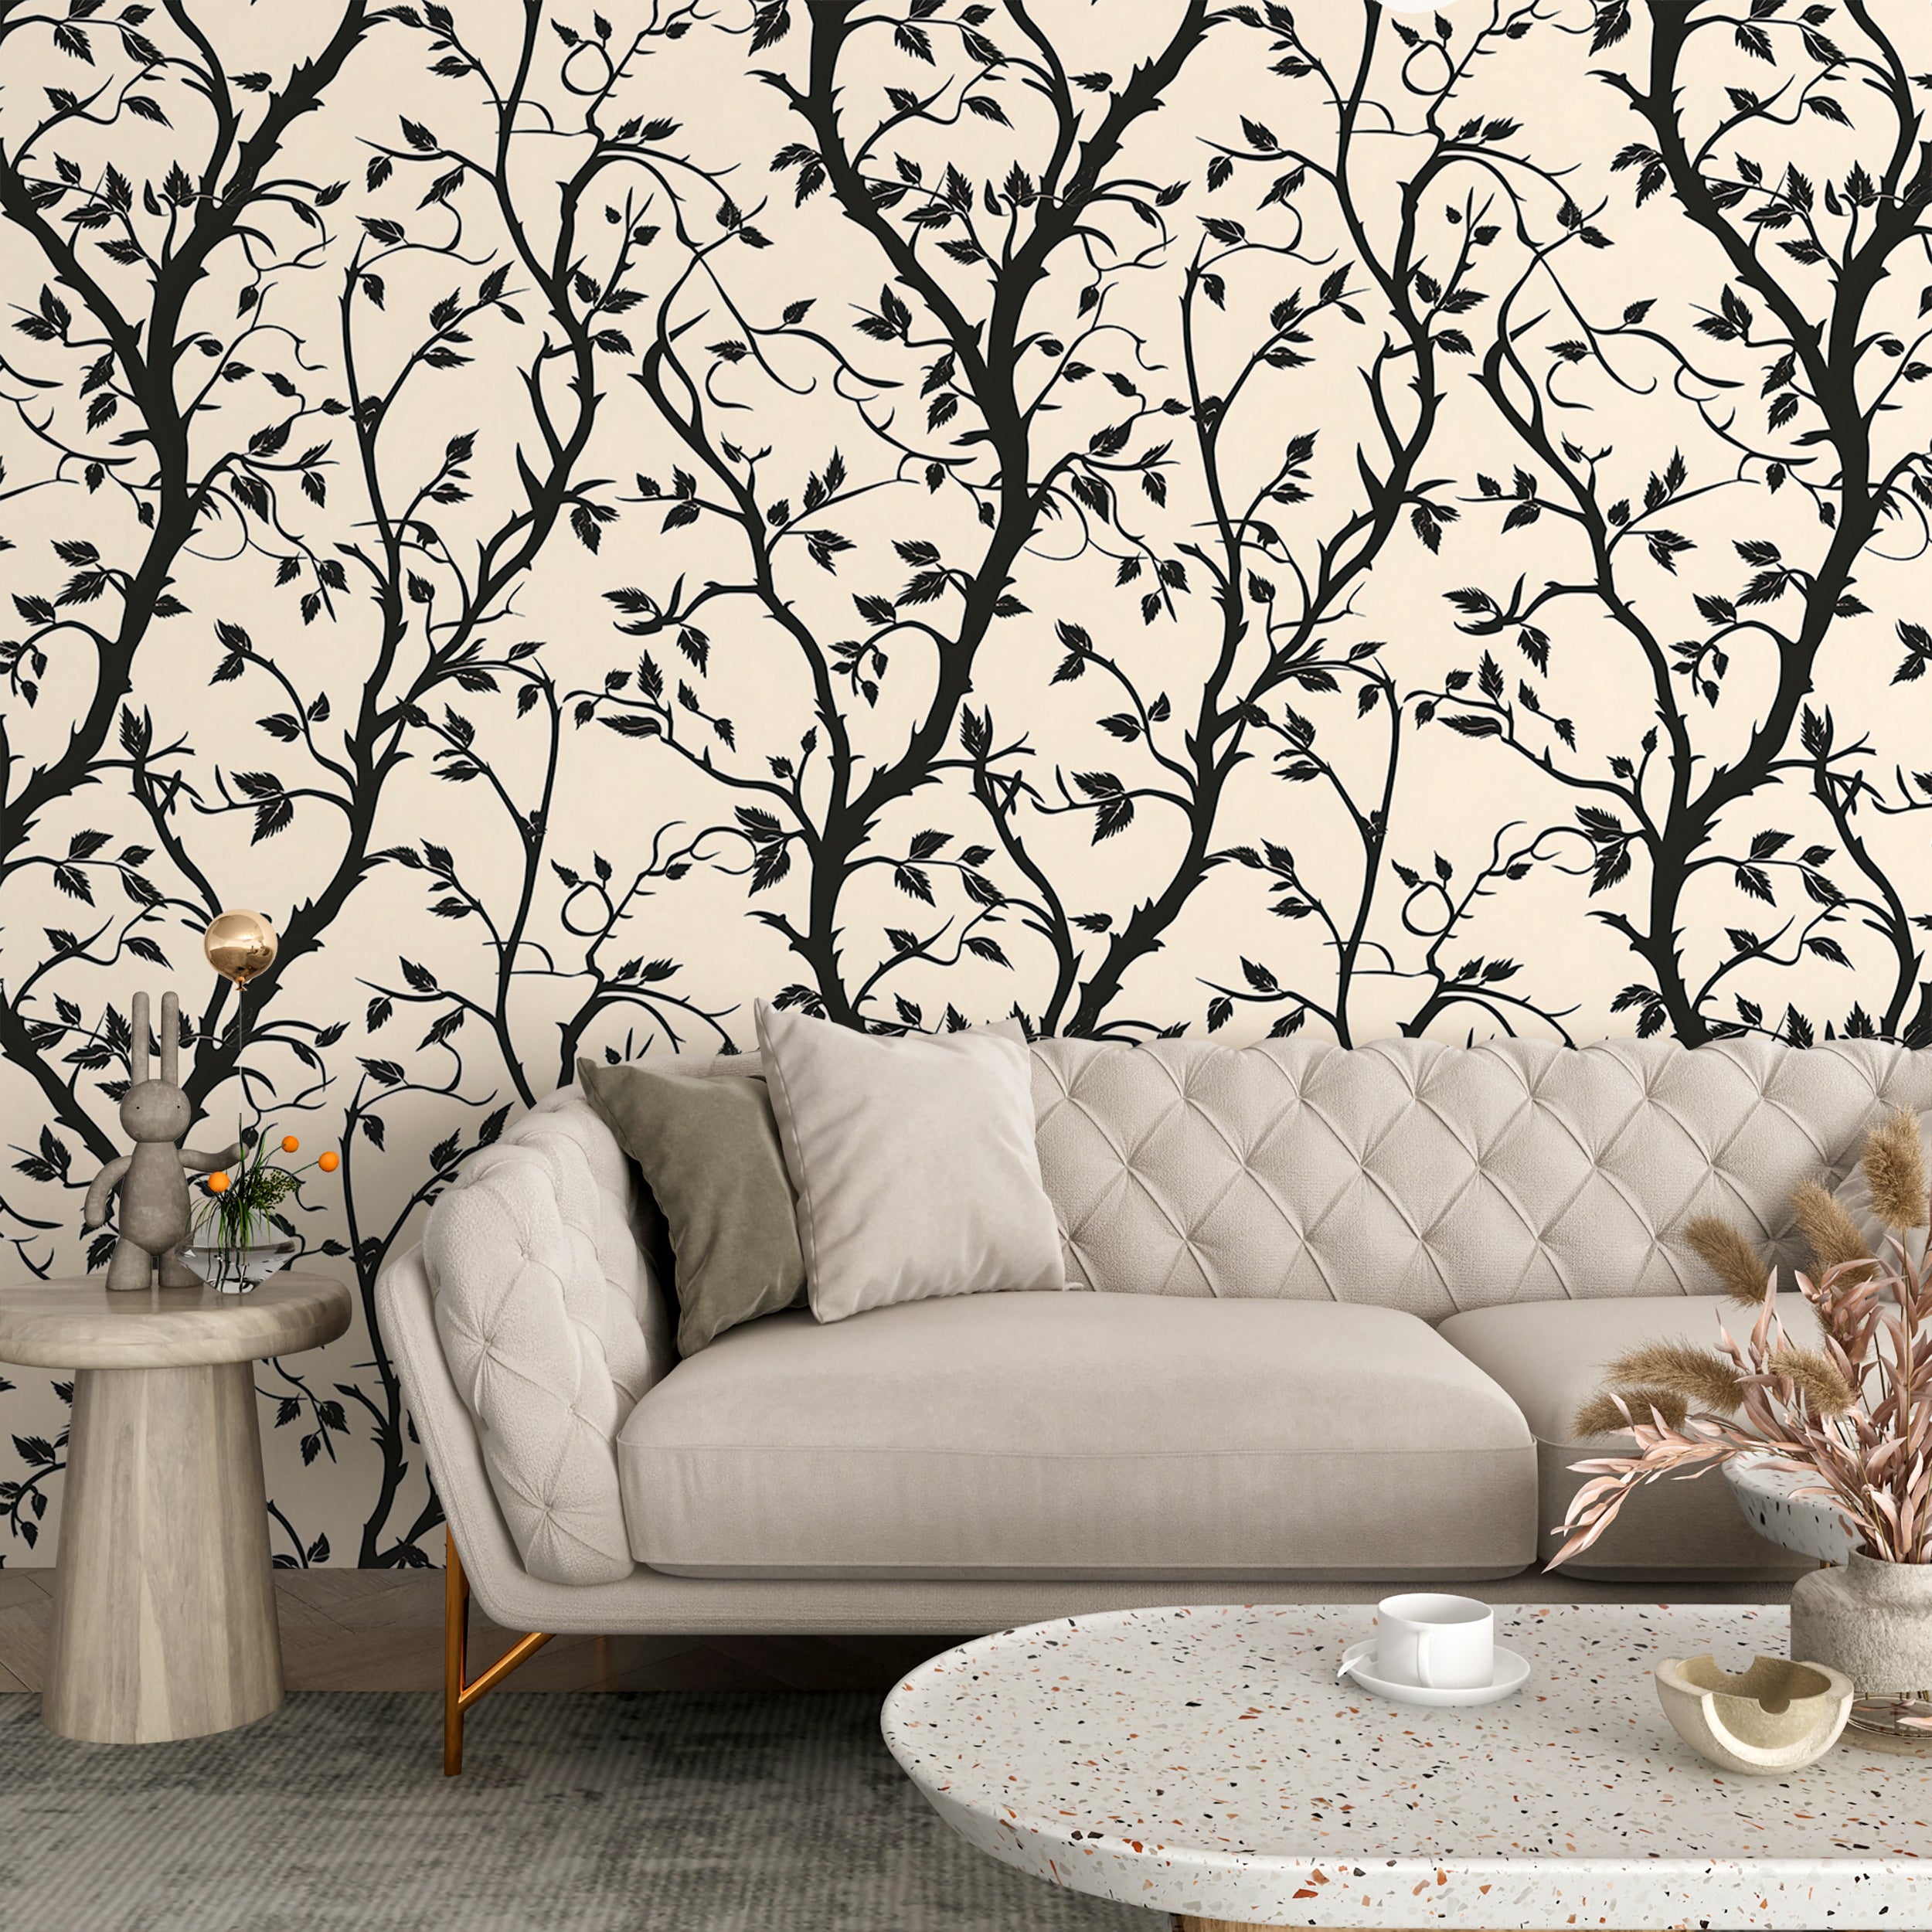 Peel and stick gothic wallpaper